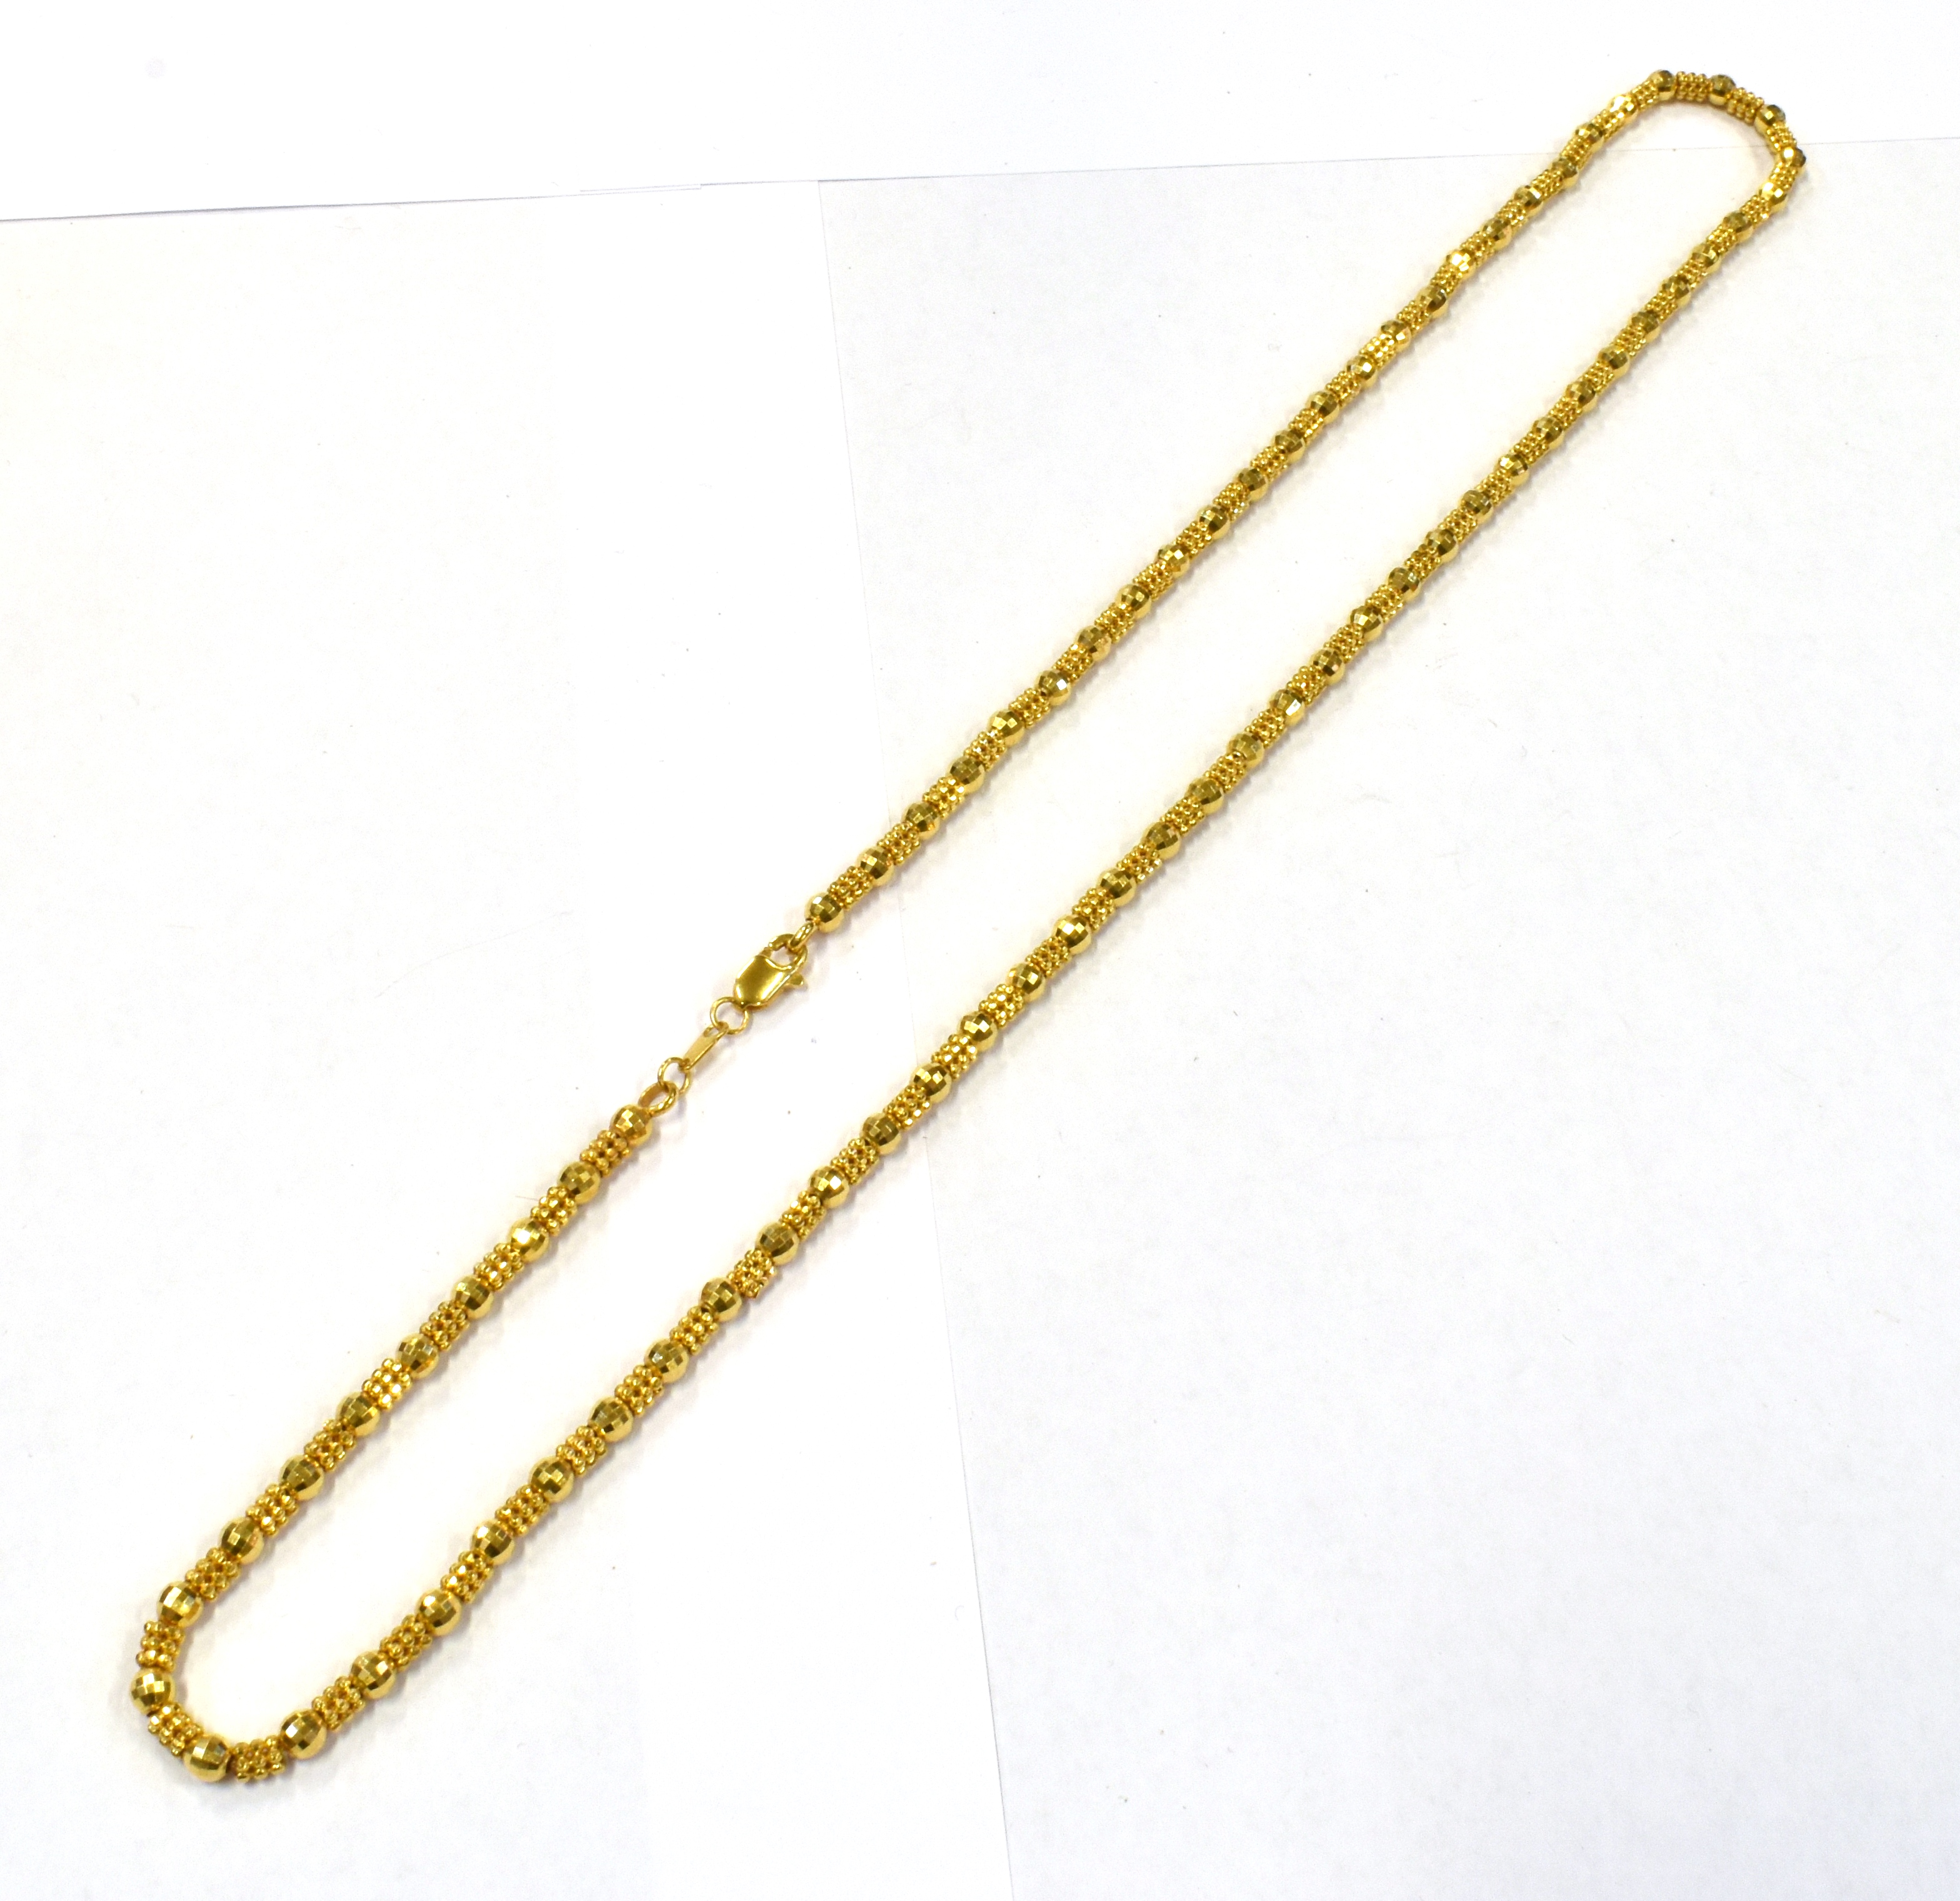 AN ARABIAN GOLD FANCY LINK NECKLACE stamped 21KT, complete with box, necklace length approx. 54cm,